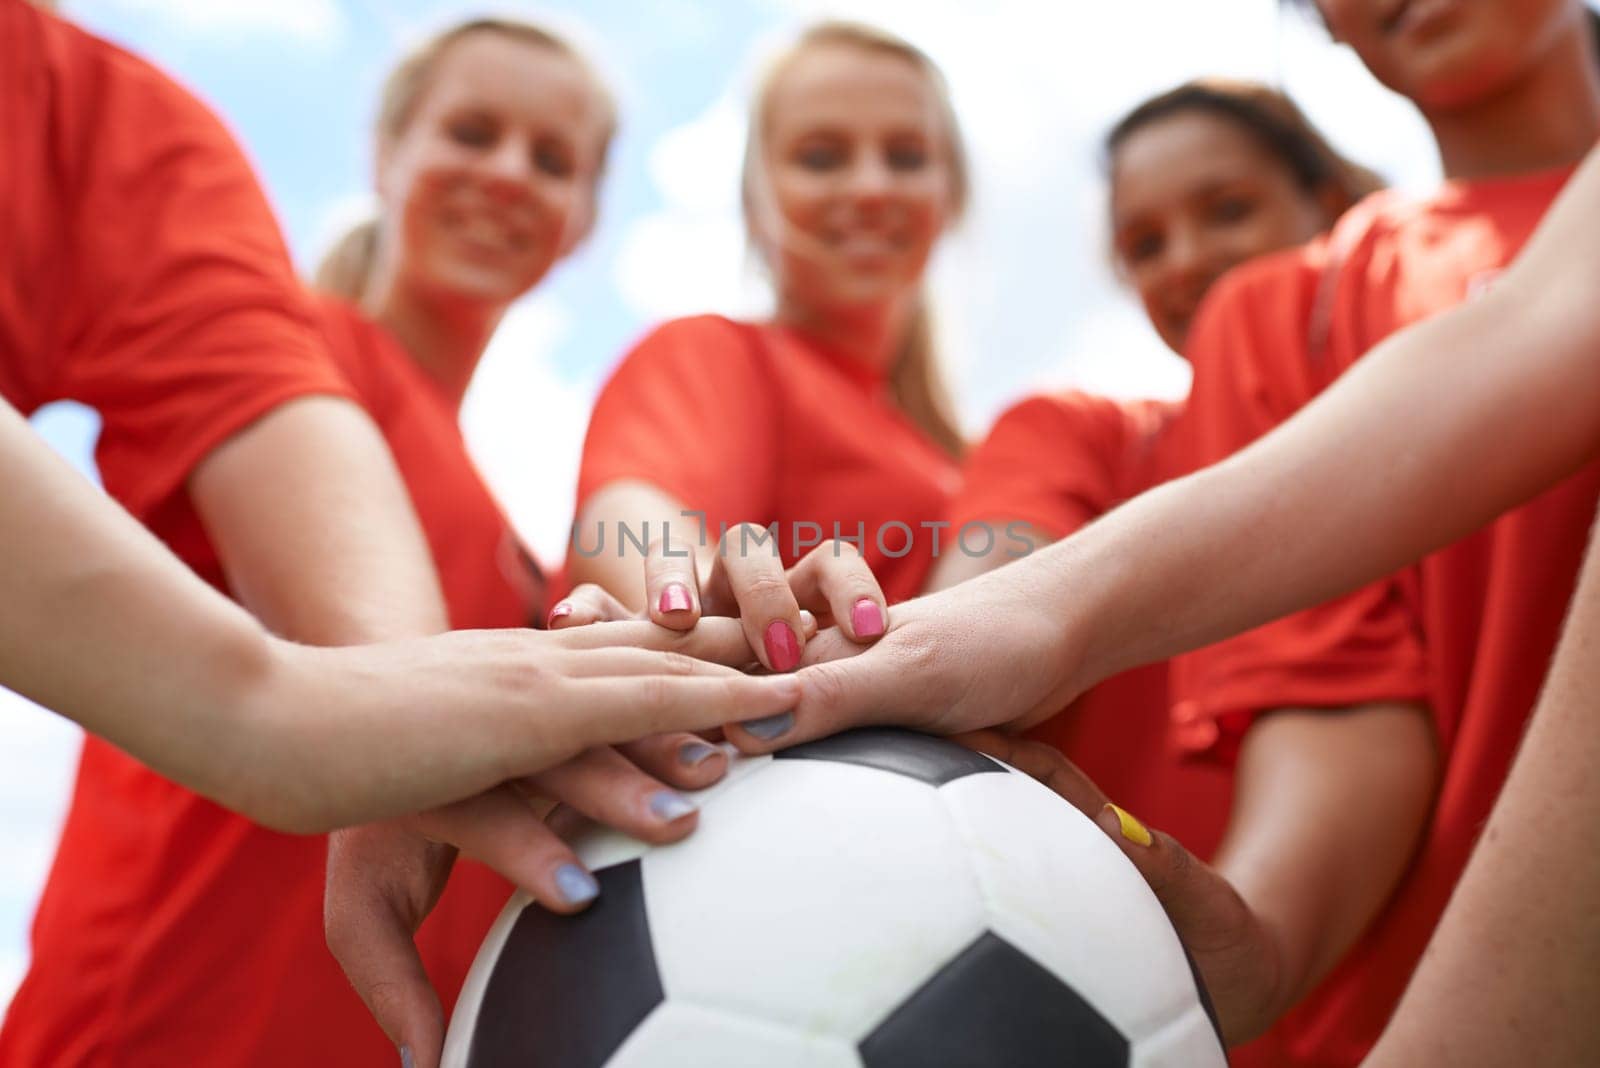 Happy woman, soccer ball and hands together for teamwork, unity or motivation on outdoor field. Closeup of group, people or football players piling in support for sports club, match or game outside.